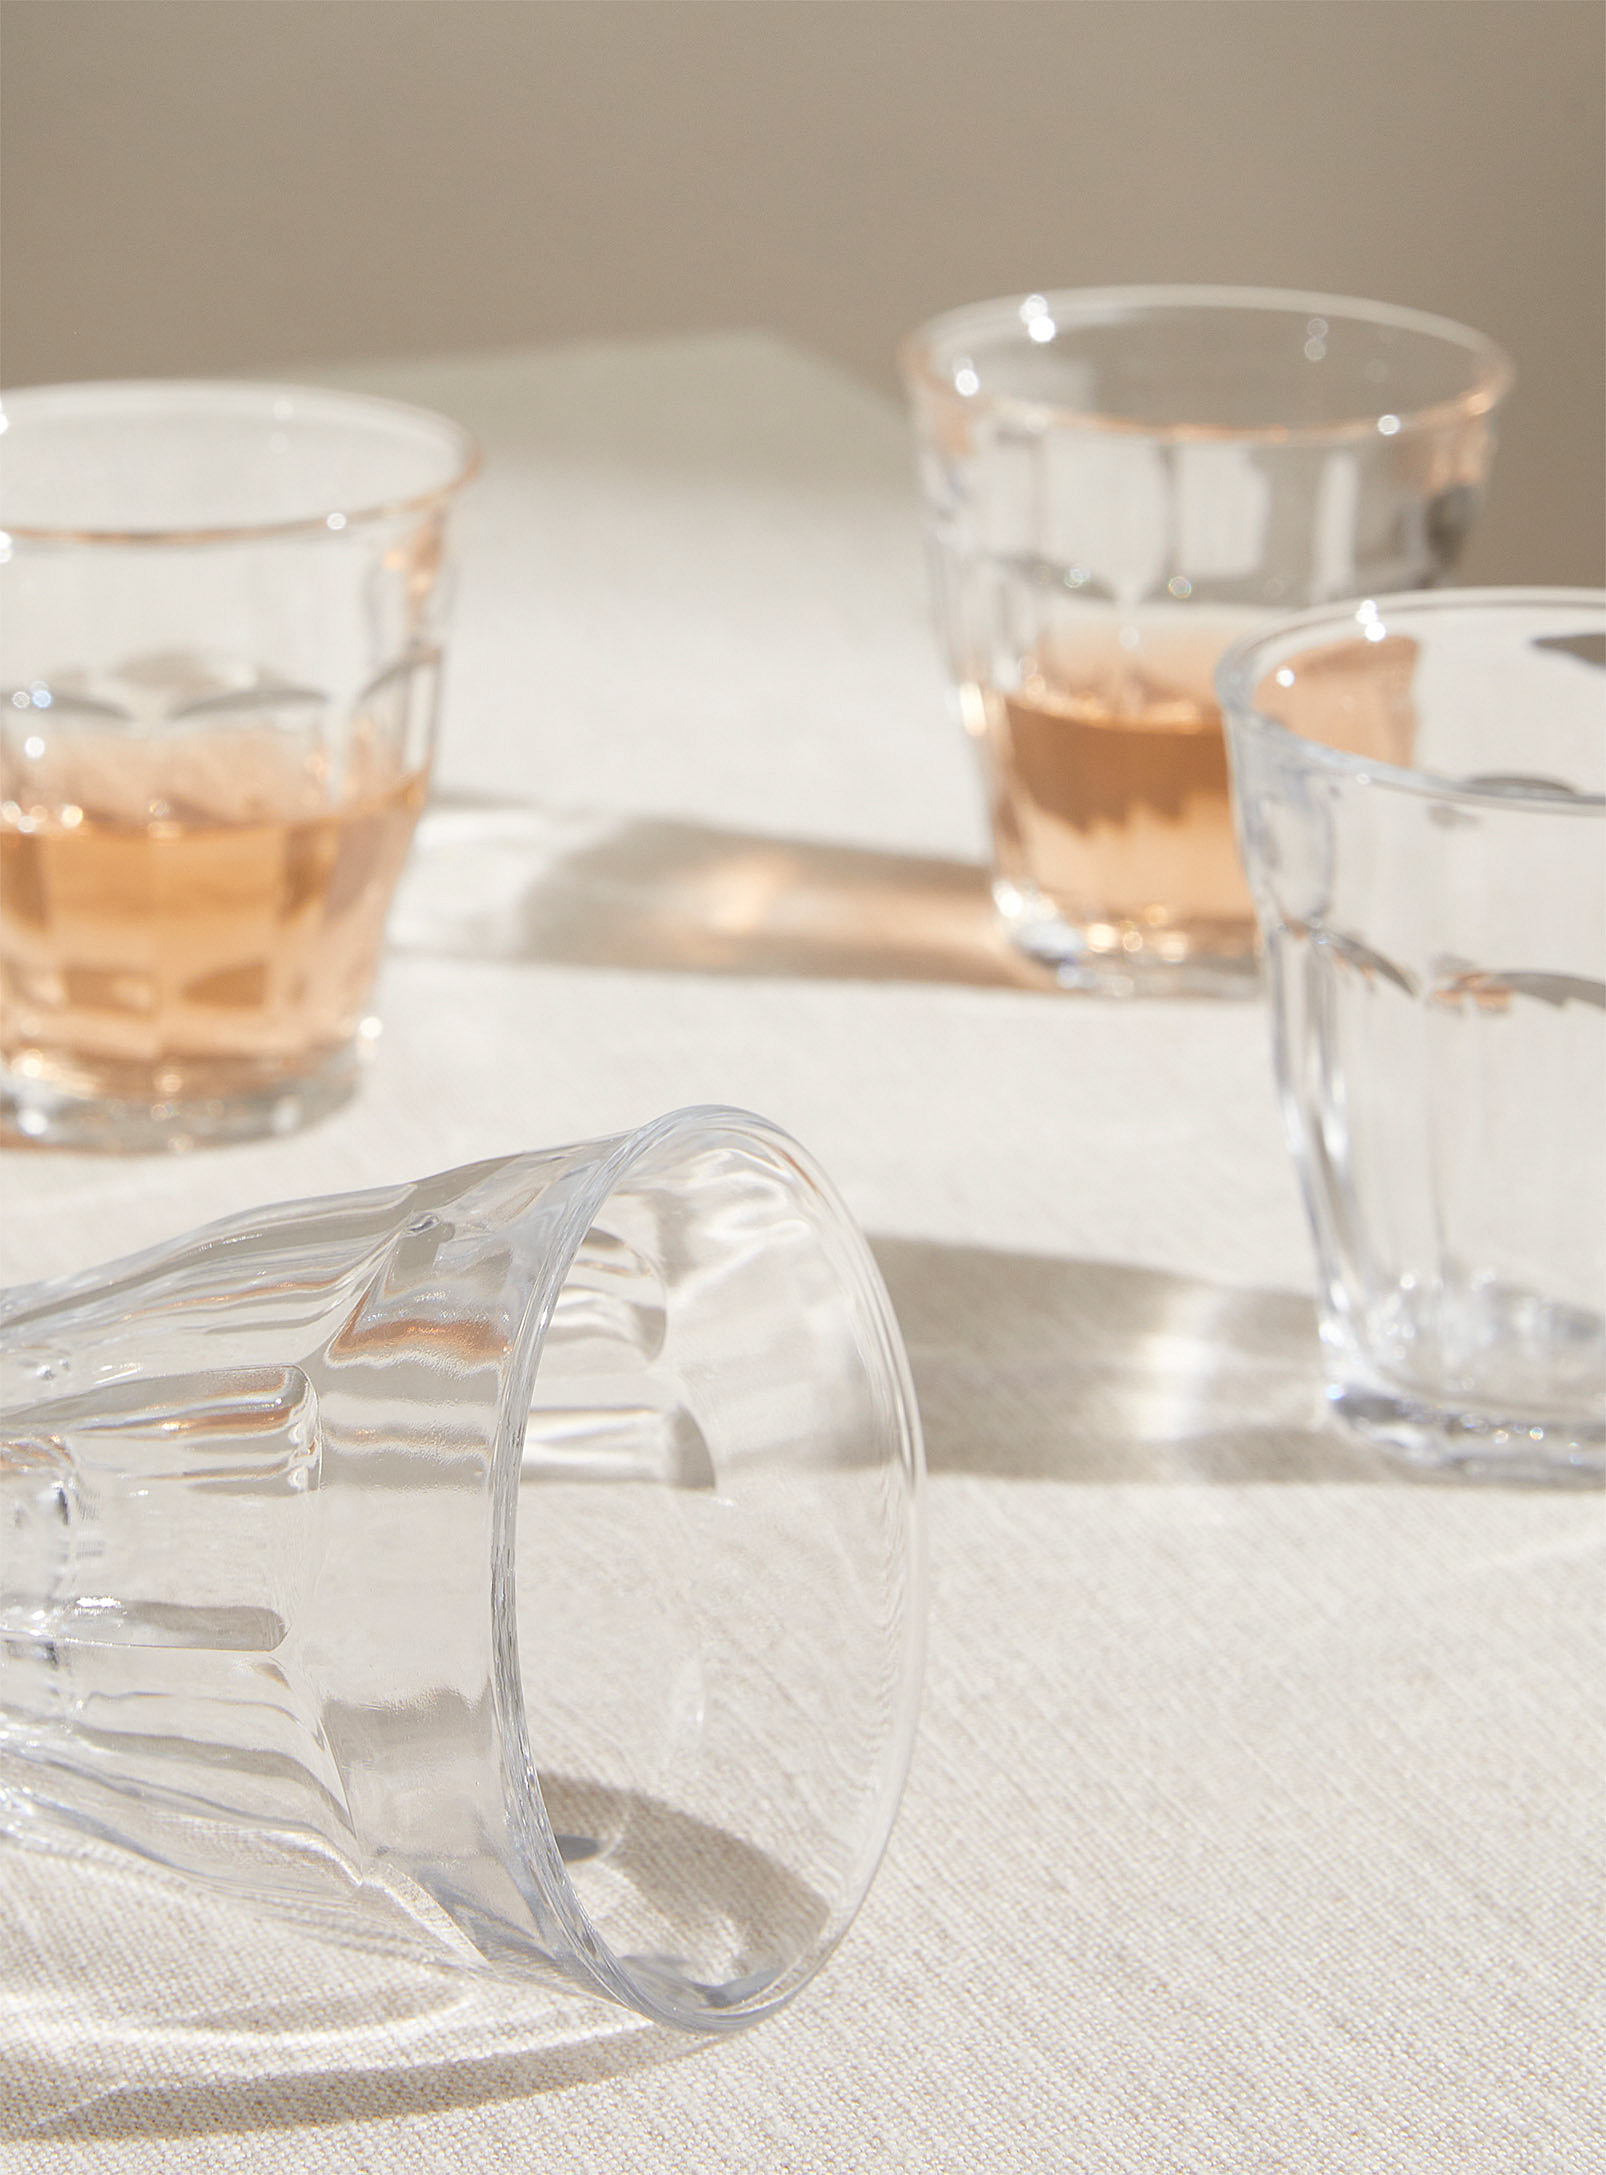 Duralex Picardie Small Clear Glasses Set Of 4 In Assorted